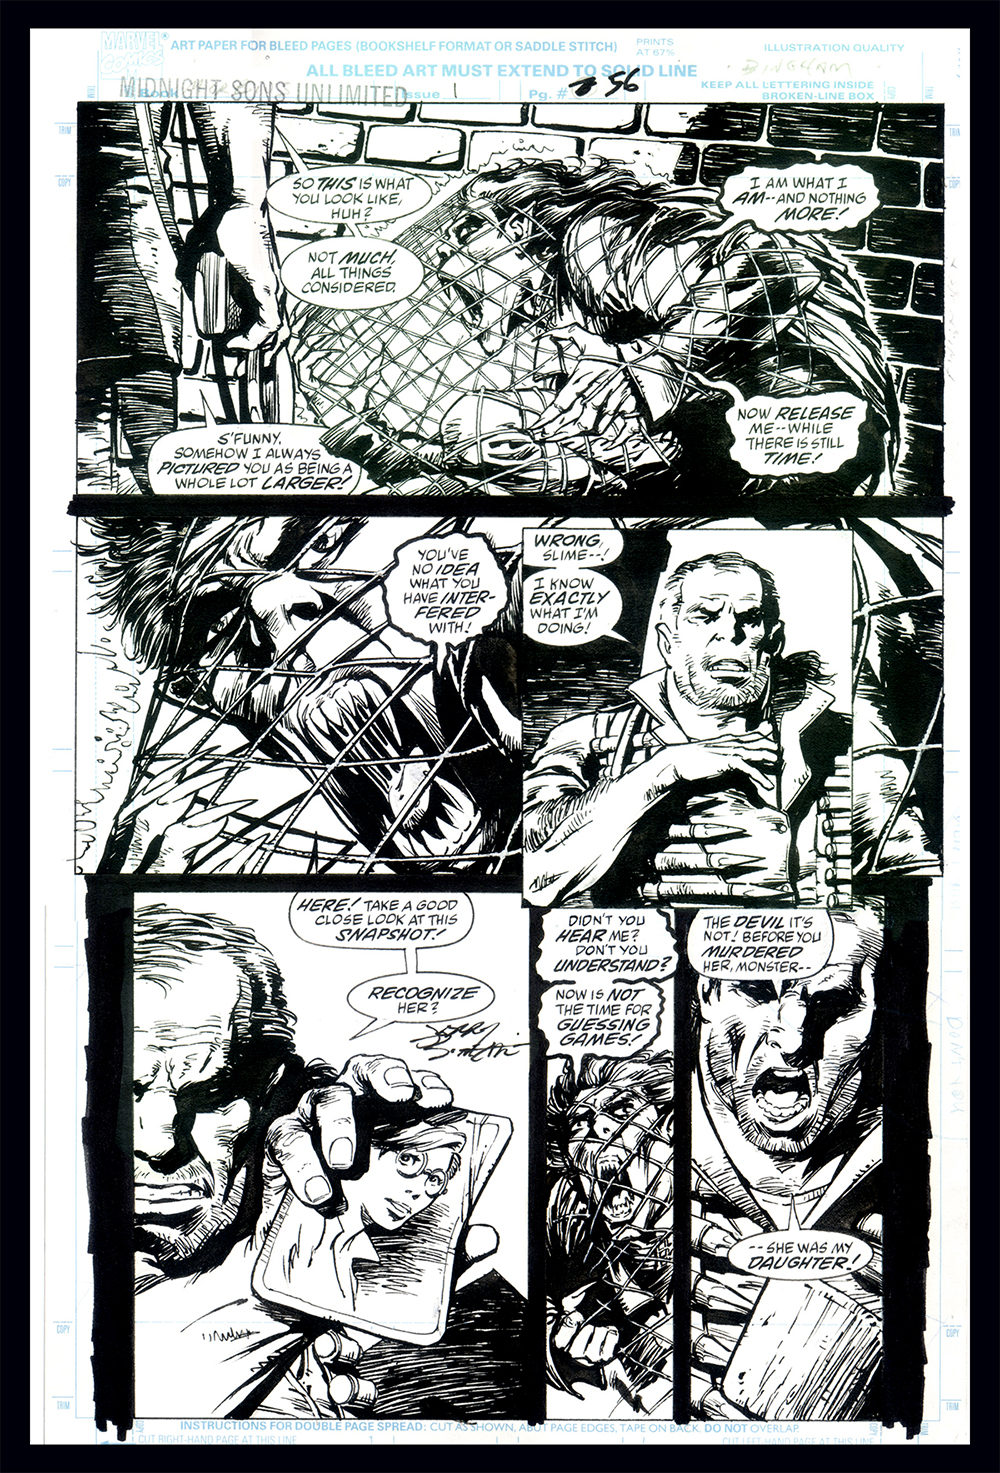 Image: Midnight Sons Unlimited #1 page 56 Art by Jerry Bingham